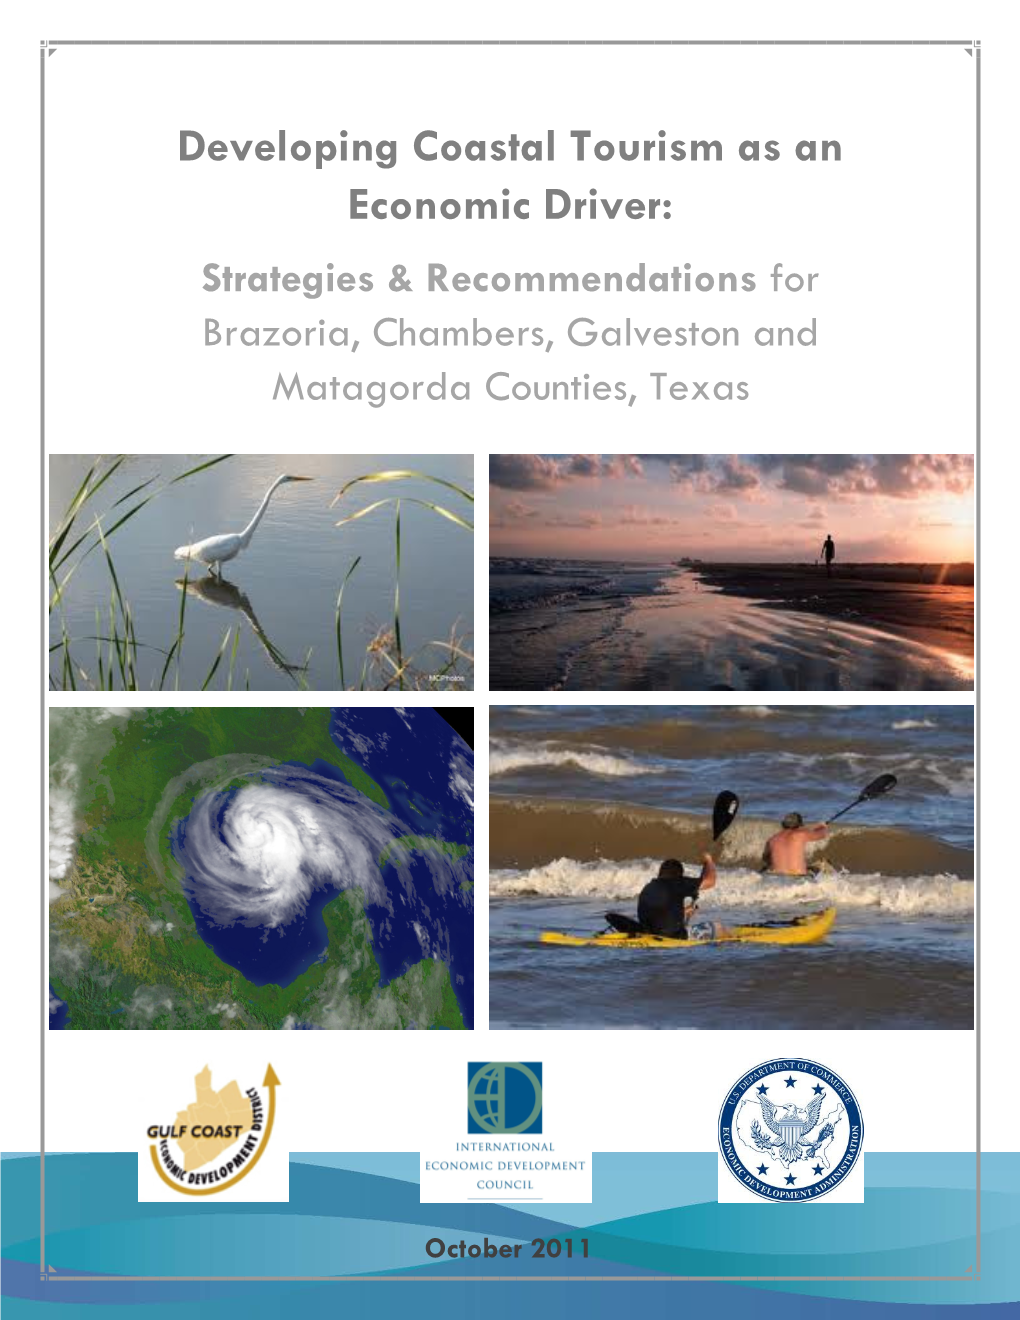 Developing Coastal Tourism As an Economic Driver: Strategies & Recommendations for Brazoria, Chambers, Galveston And